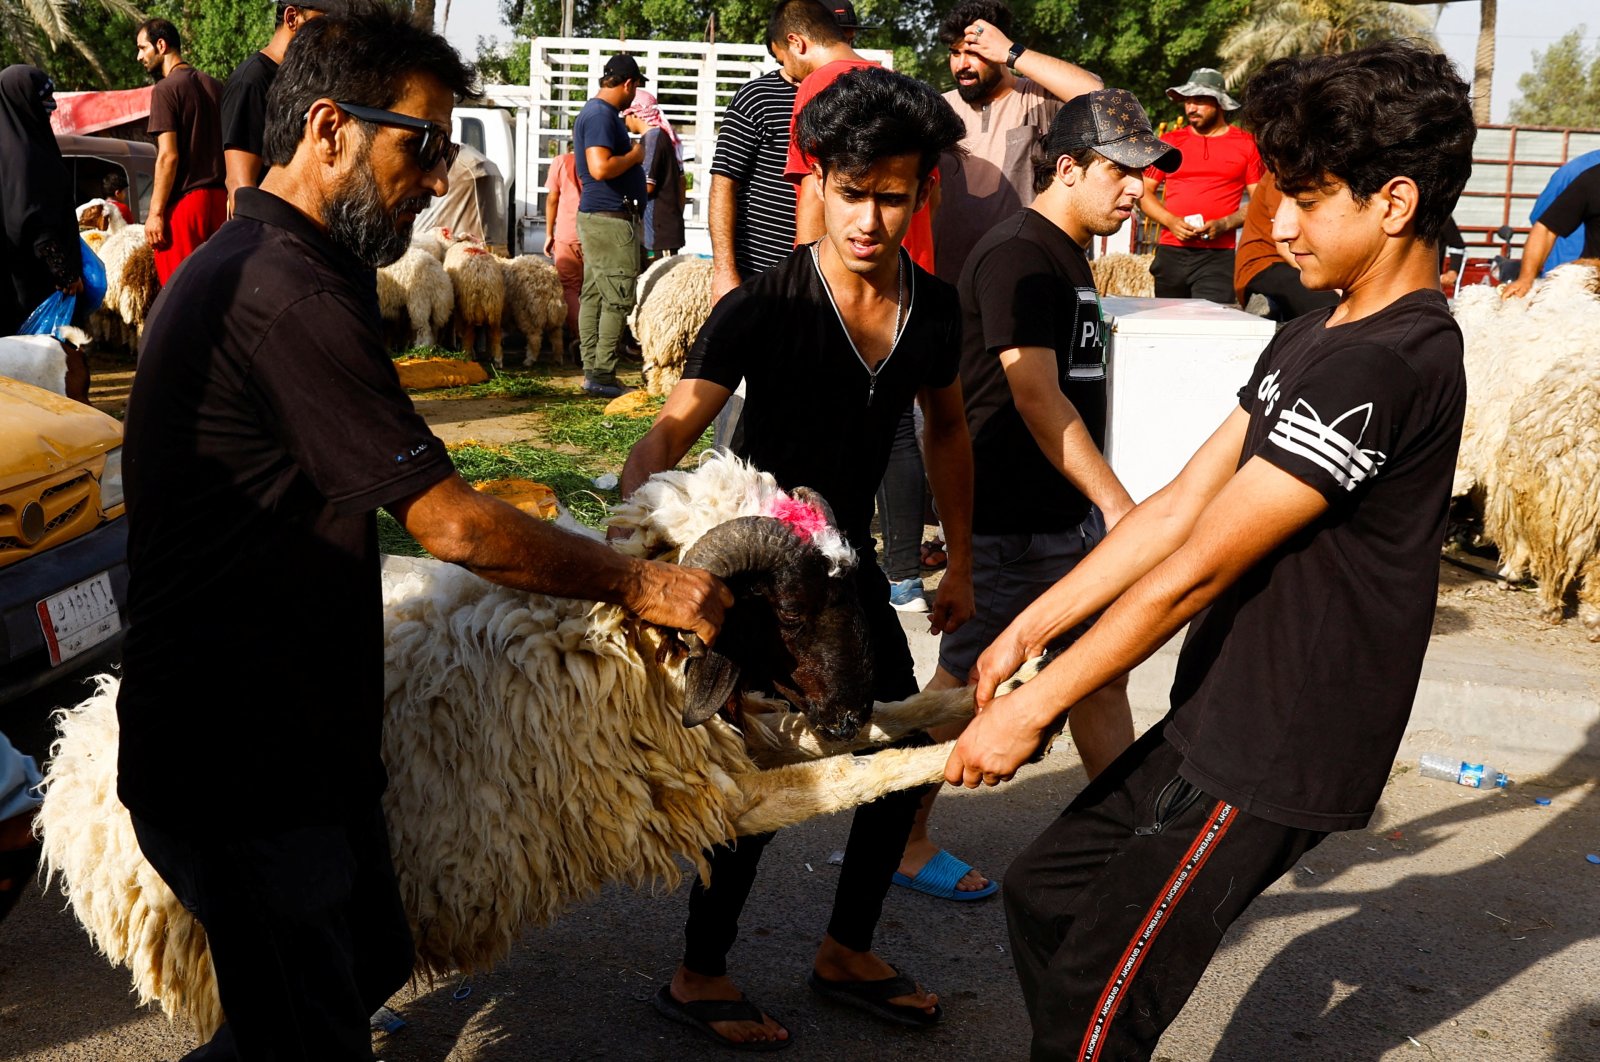 Iraqi men move a sacrificial ram after purchasing it from a livestock market, ahead of the Eid al-Adha festival, in Baghdad, Iraq, July 8, 2022. (Reuters Photo)